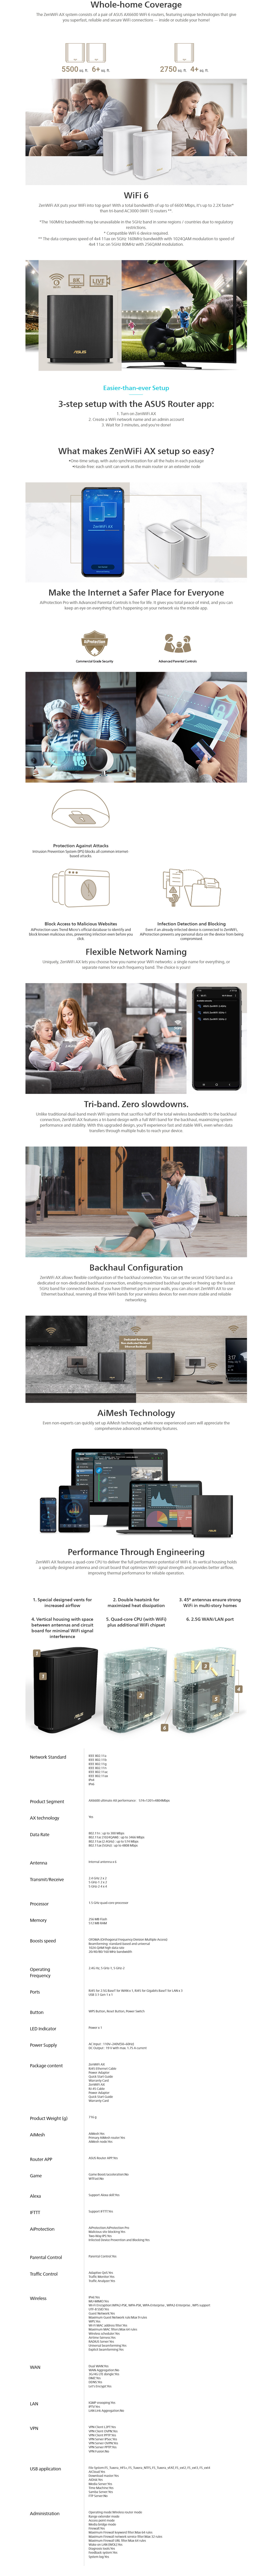 A large marketing image providing additional information about the product ASUS ZenWifi AX XT8 V2 AX6600 Tri Band WIFI 6 Router - Additional alt info not provided